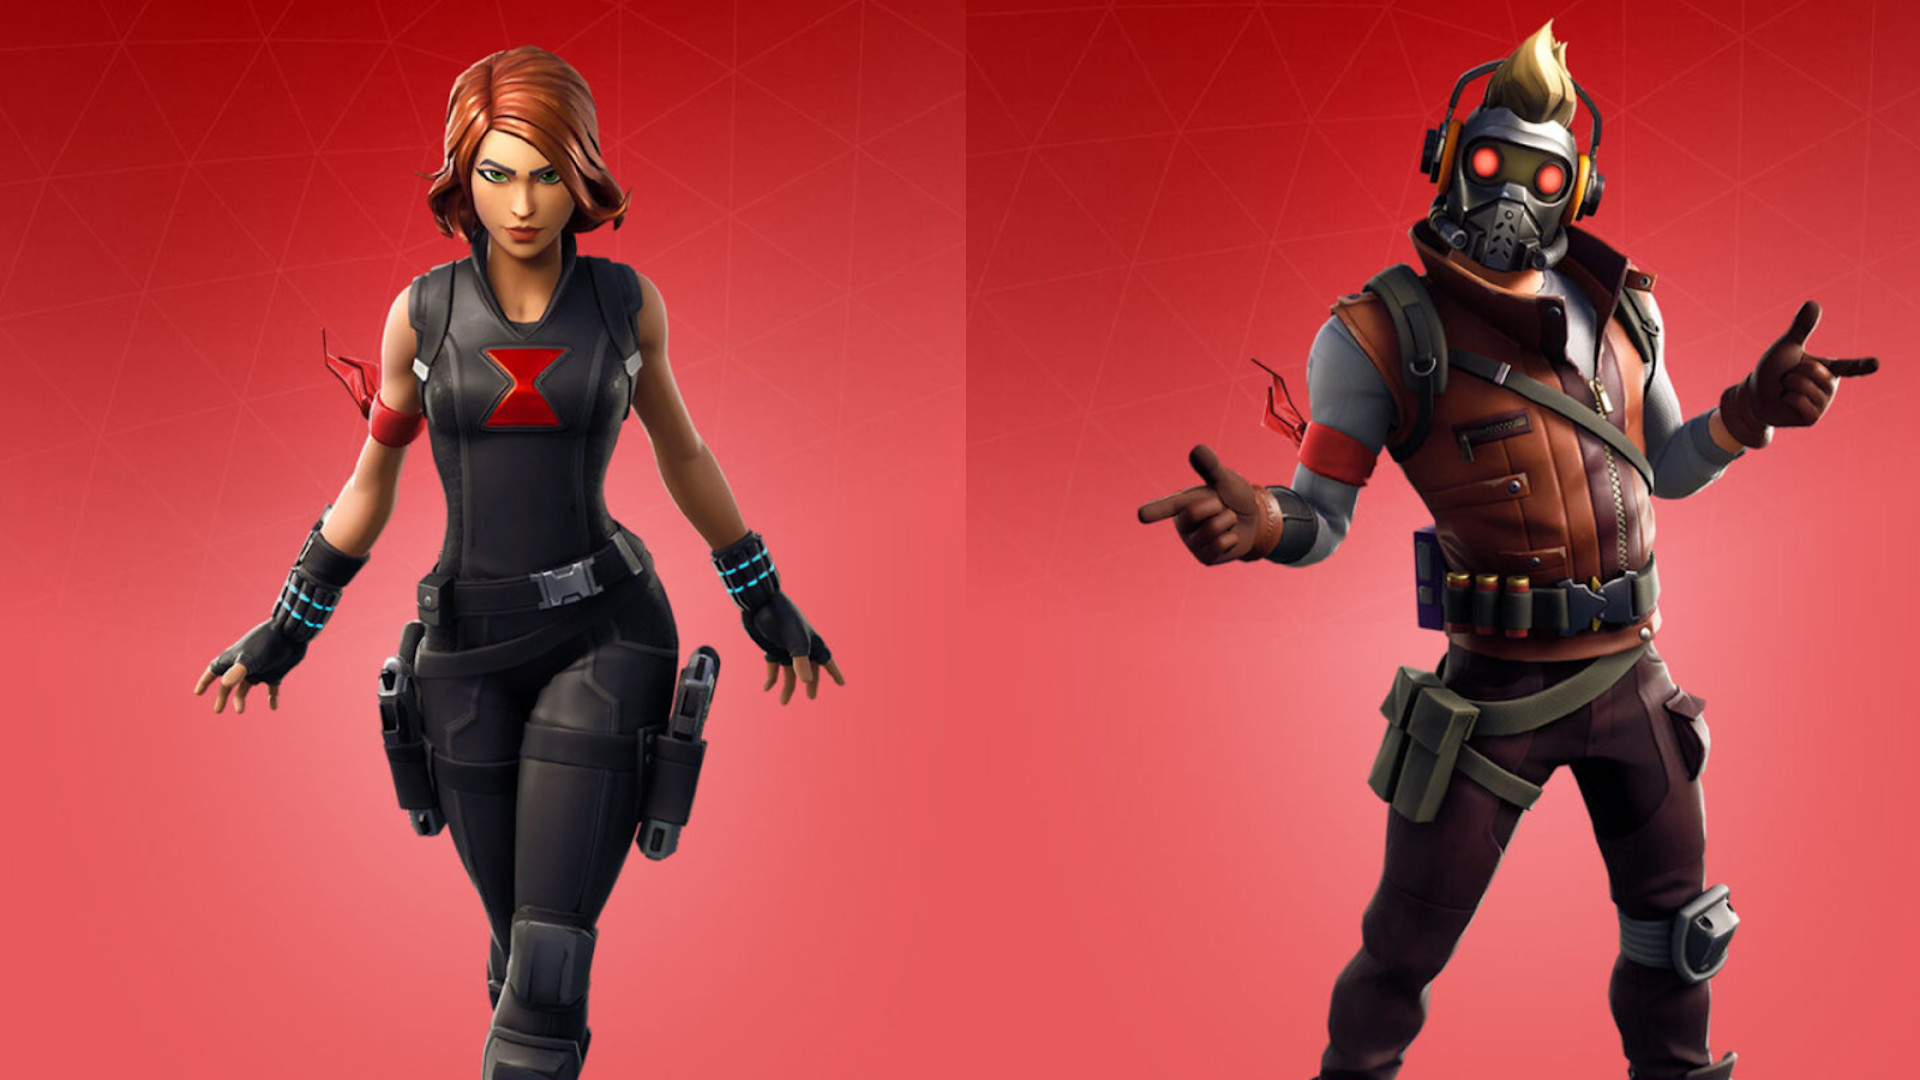 Rarest Fortnite skins: Black Widow on the left and Star Lord on the right, both posing with their arms out.